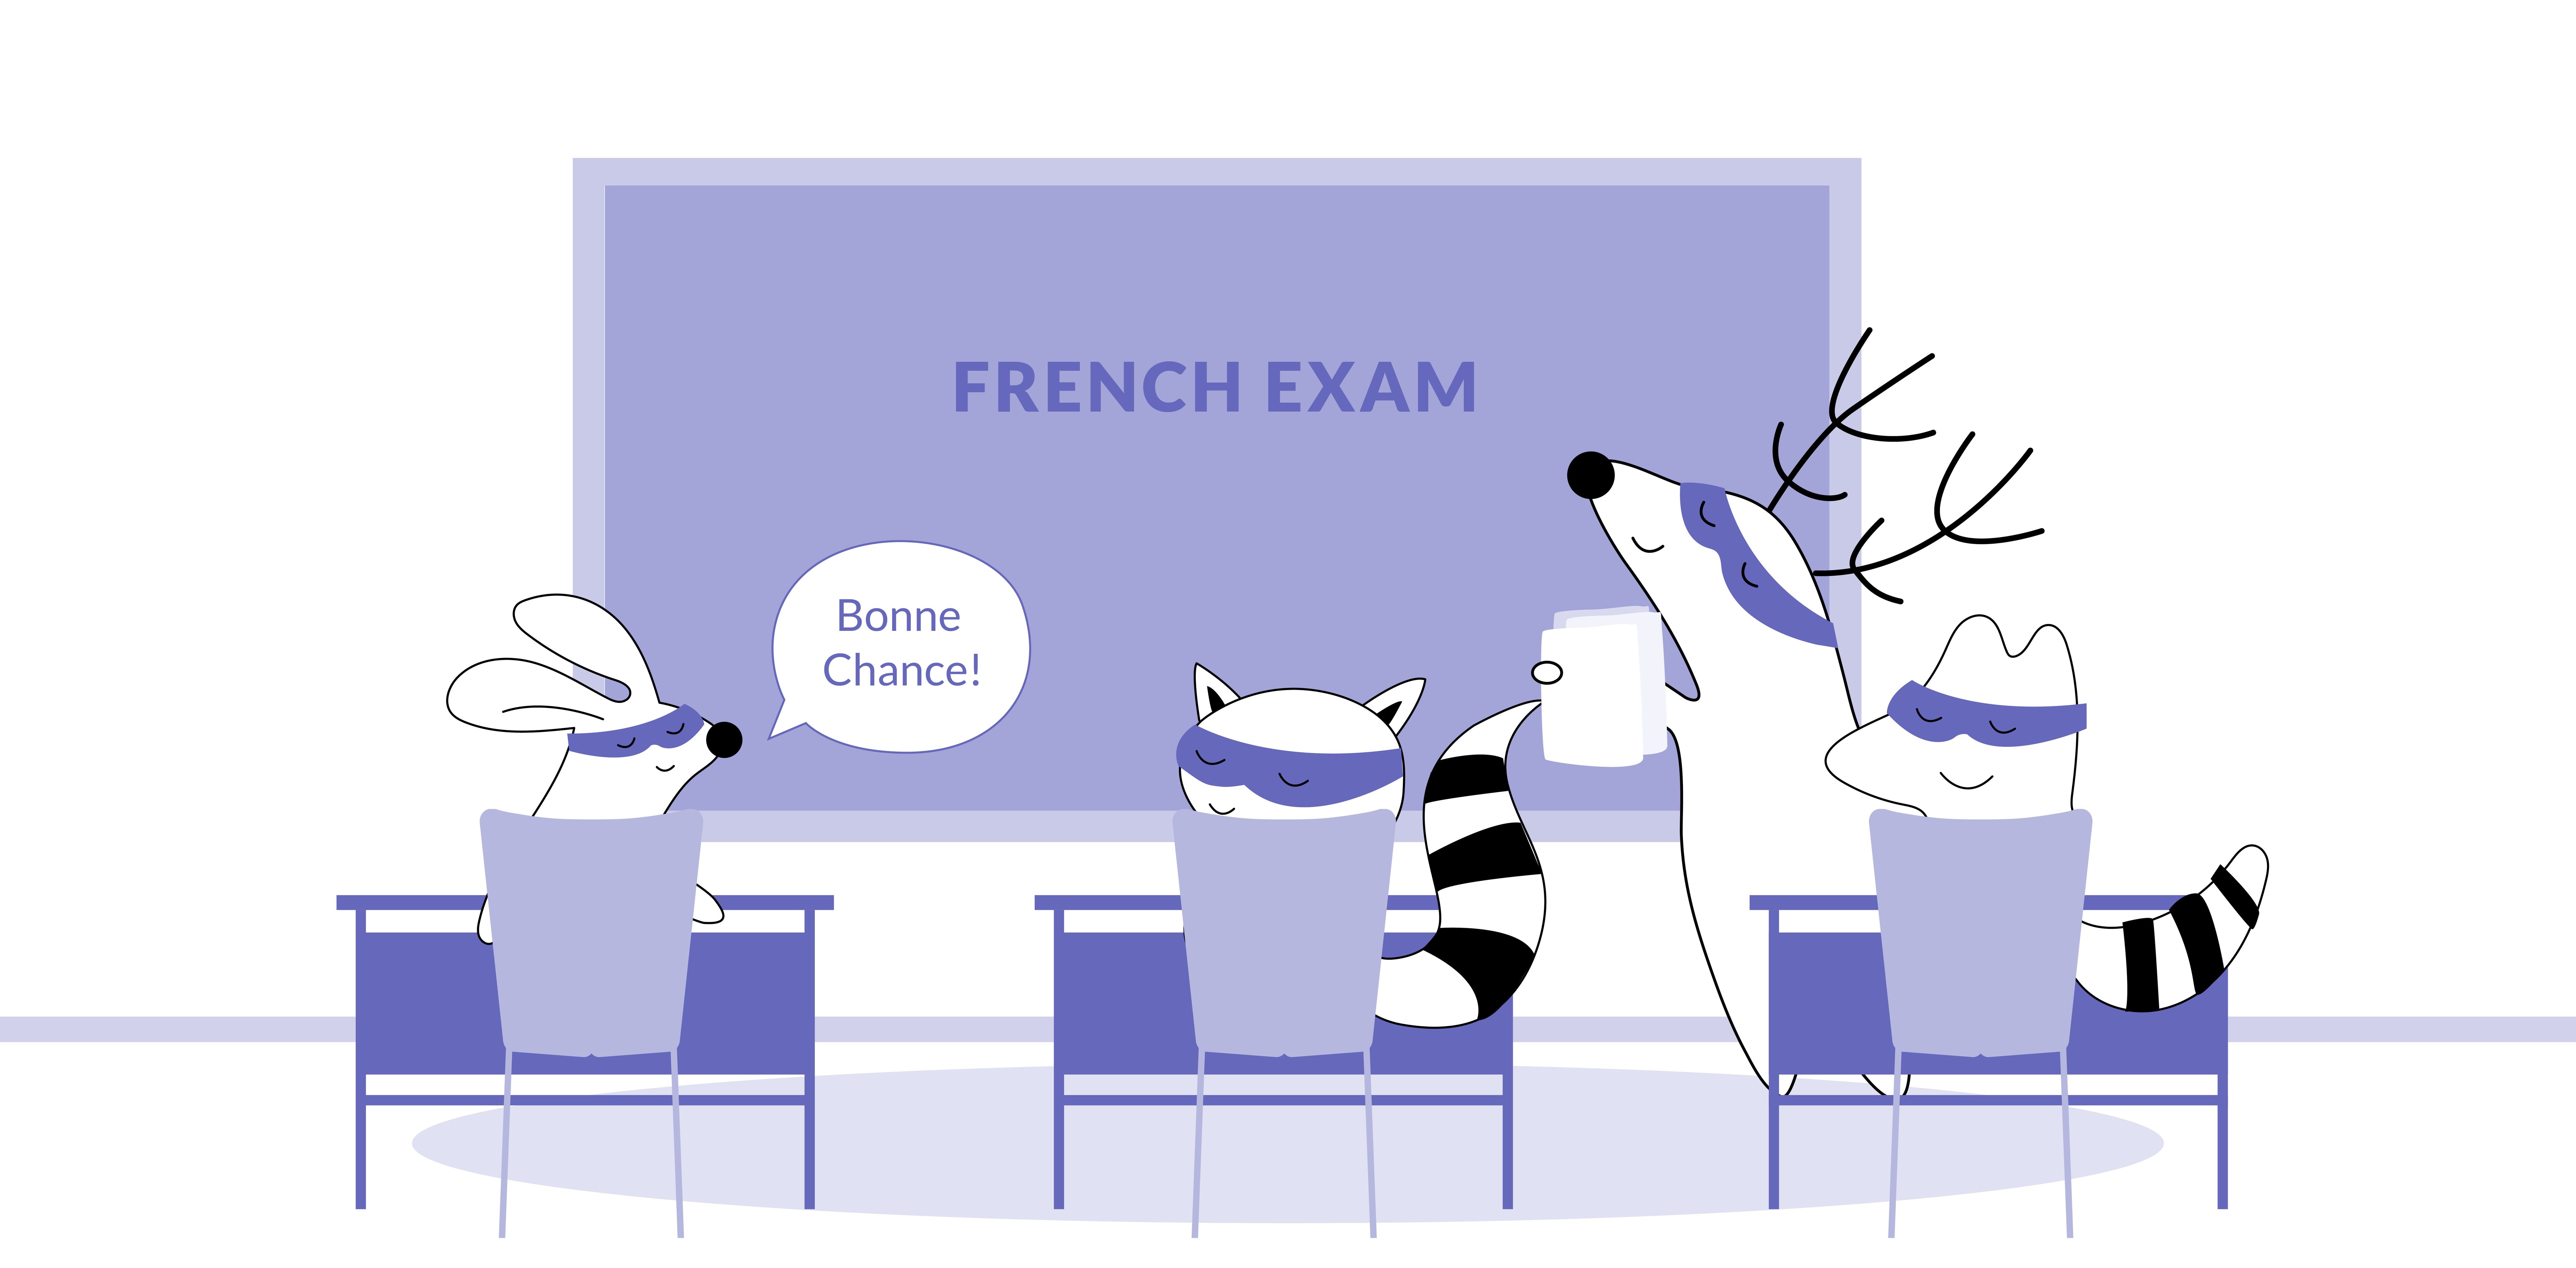 Soren enters the classroom with an exam paper in his hand, Iggy says, “Bonne Chance!” to him.